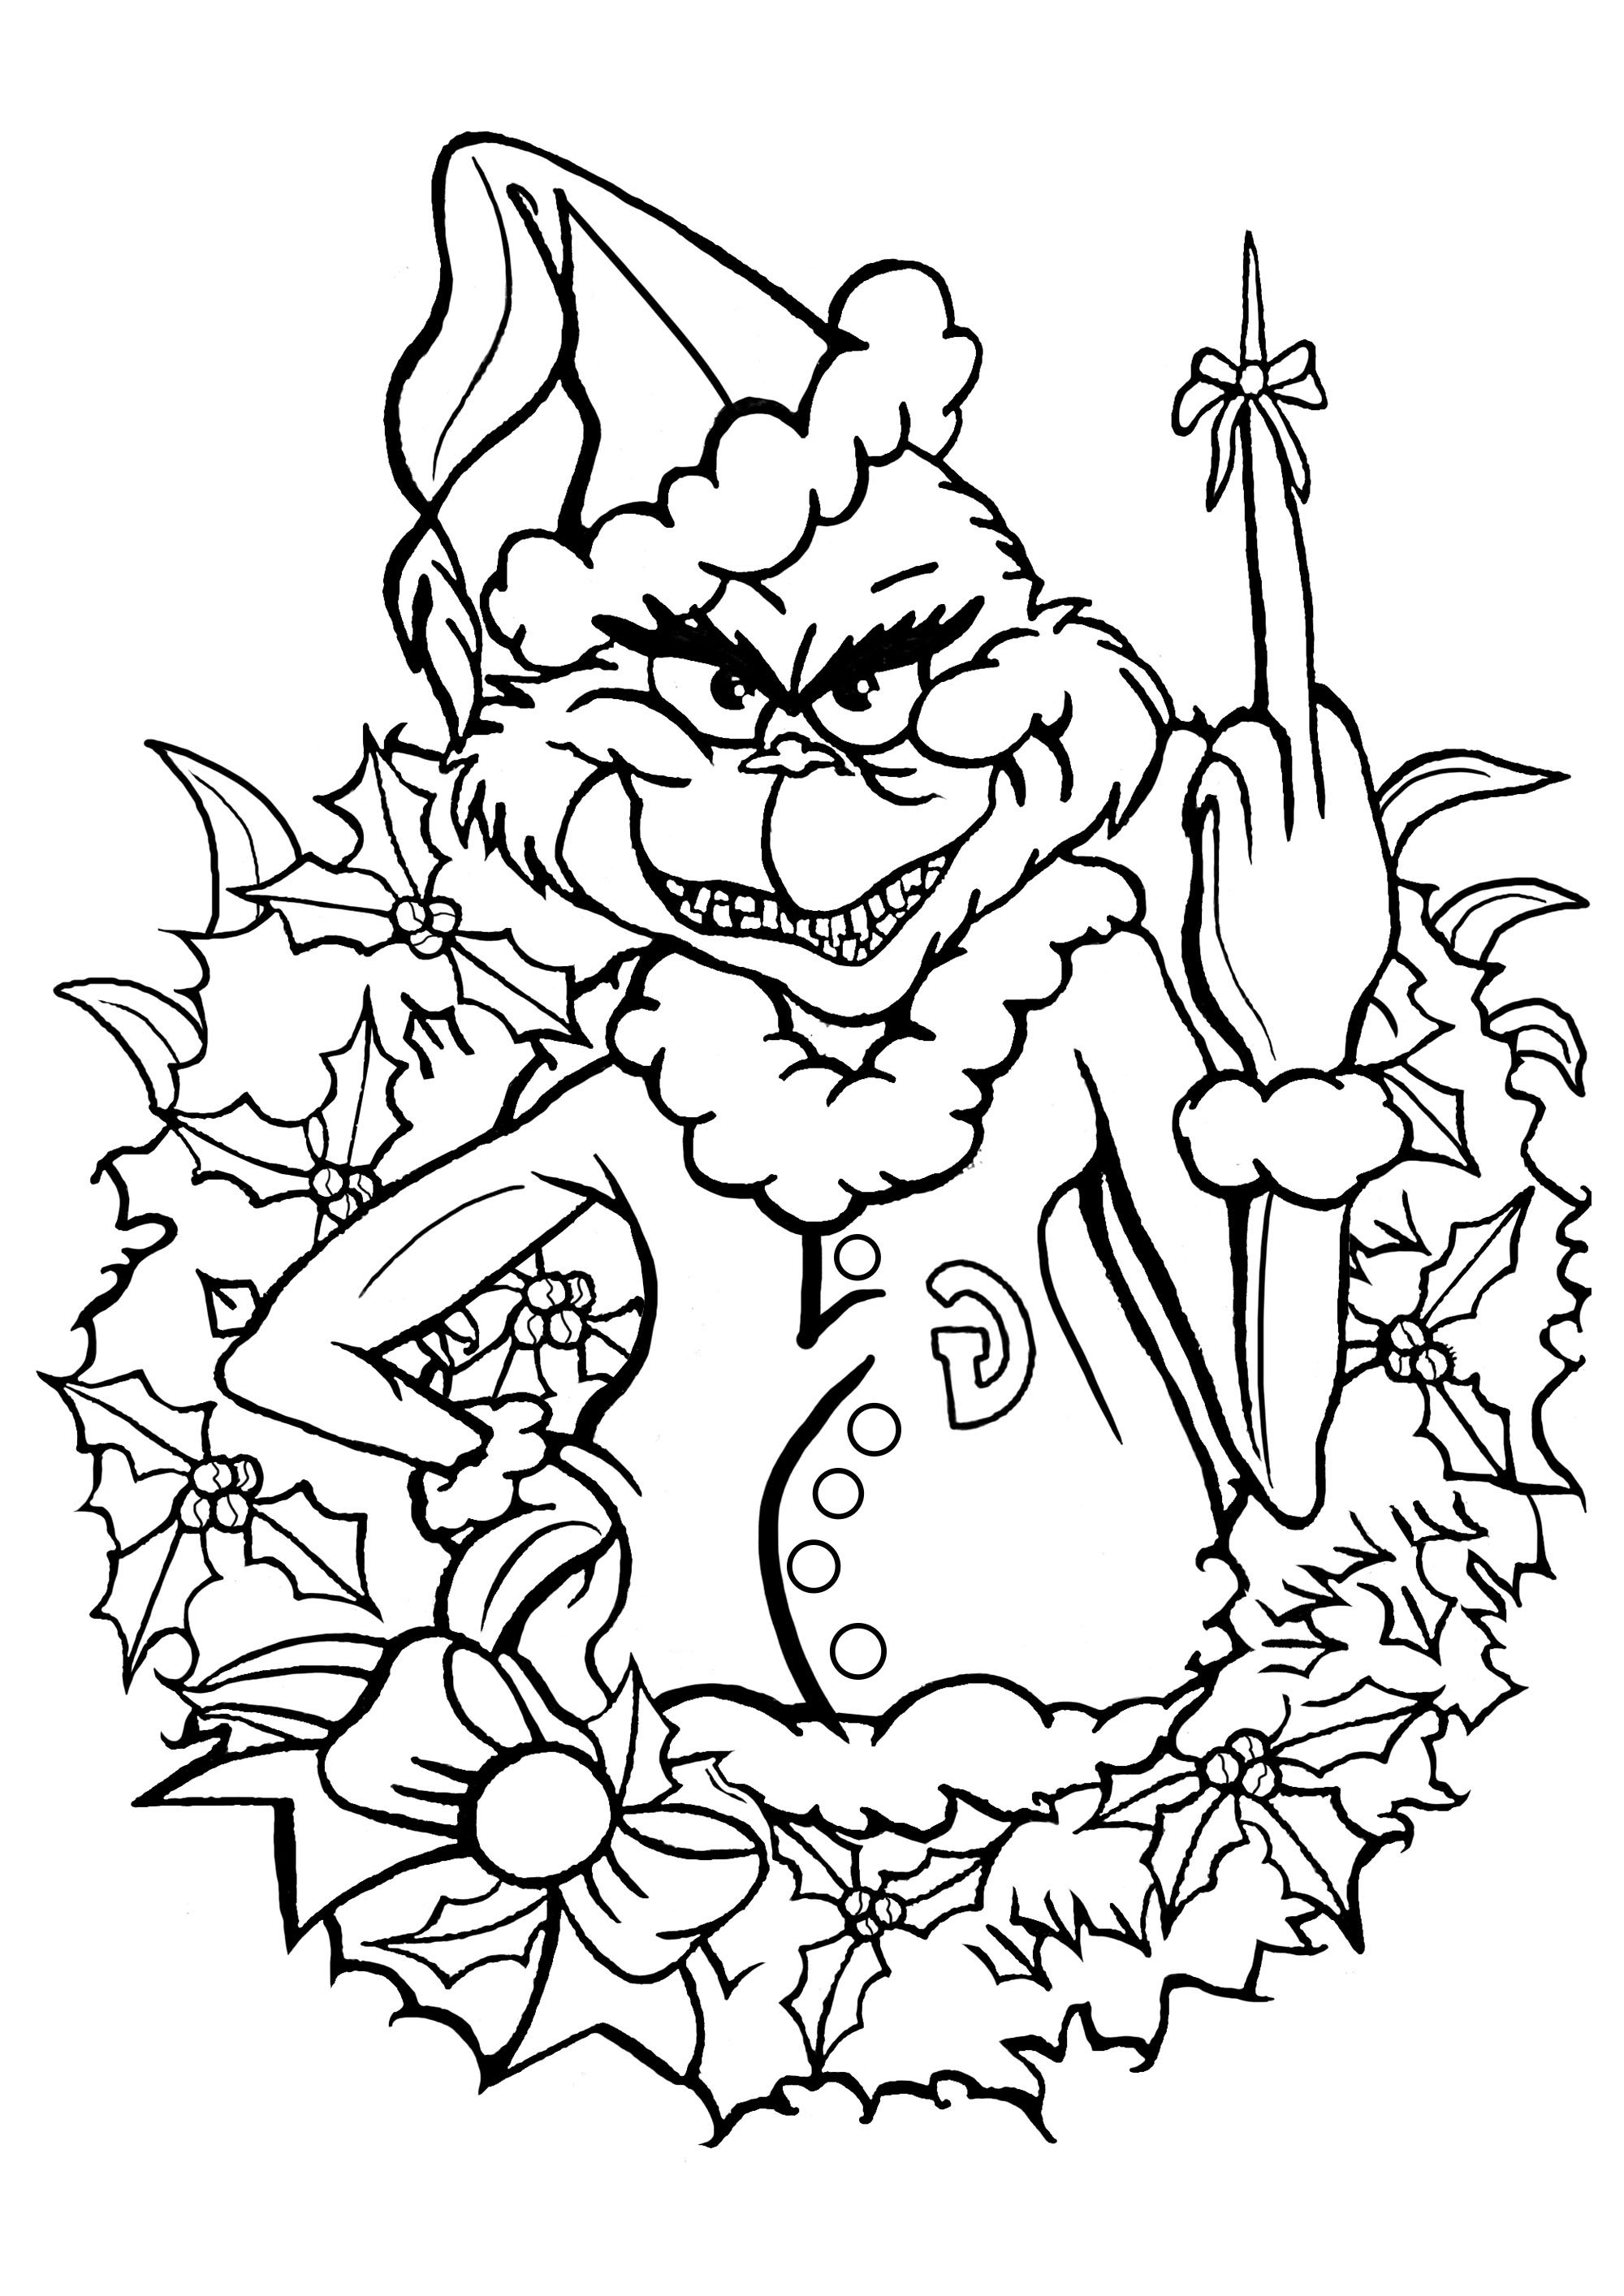 Printable The Grinch coloring page to print and color for free